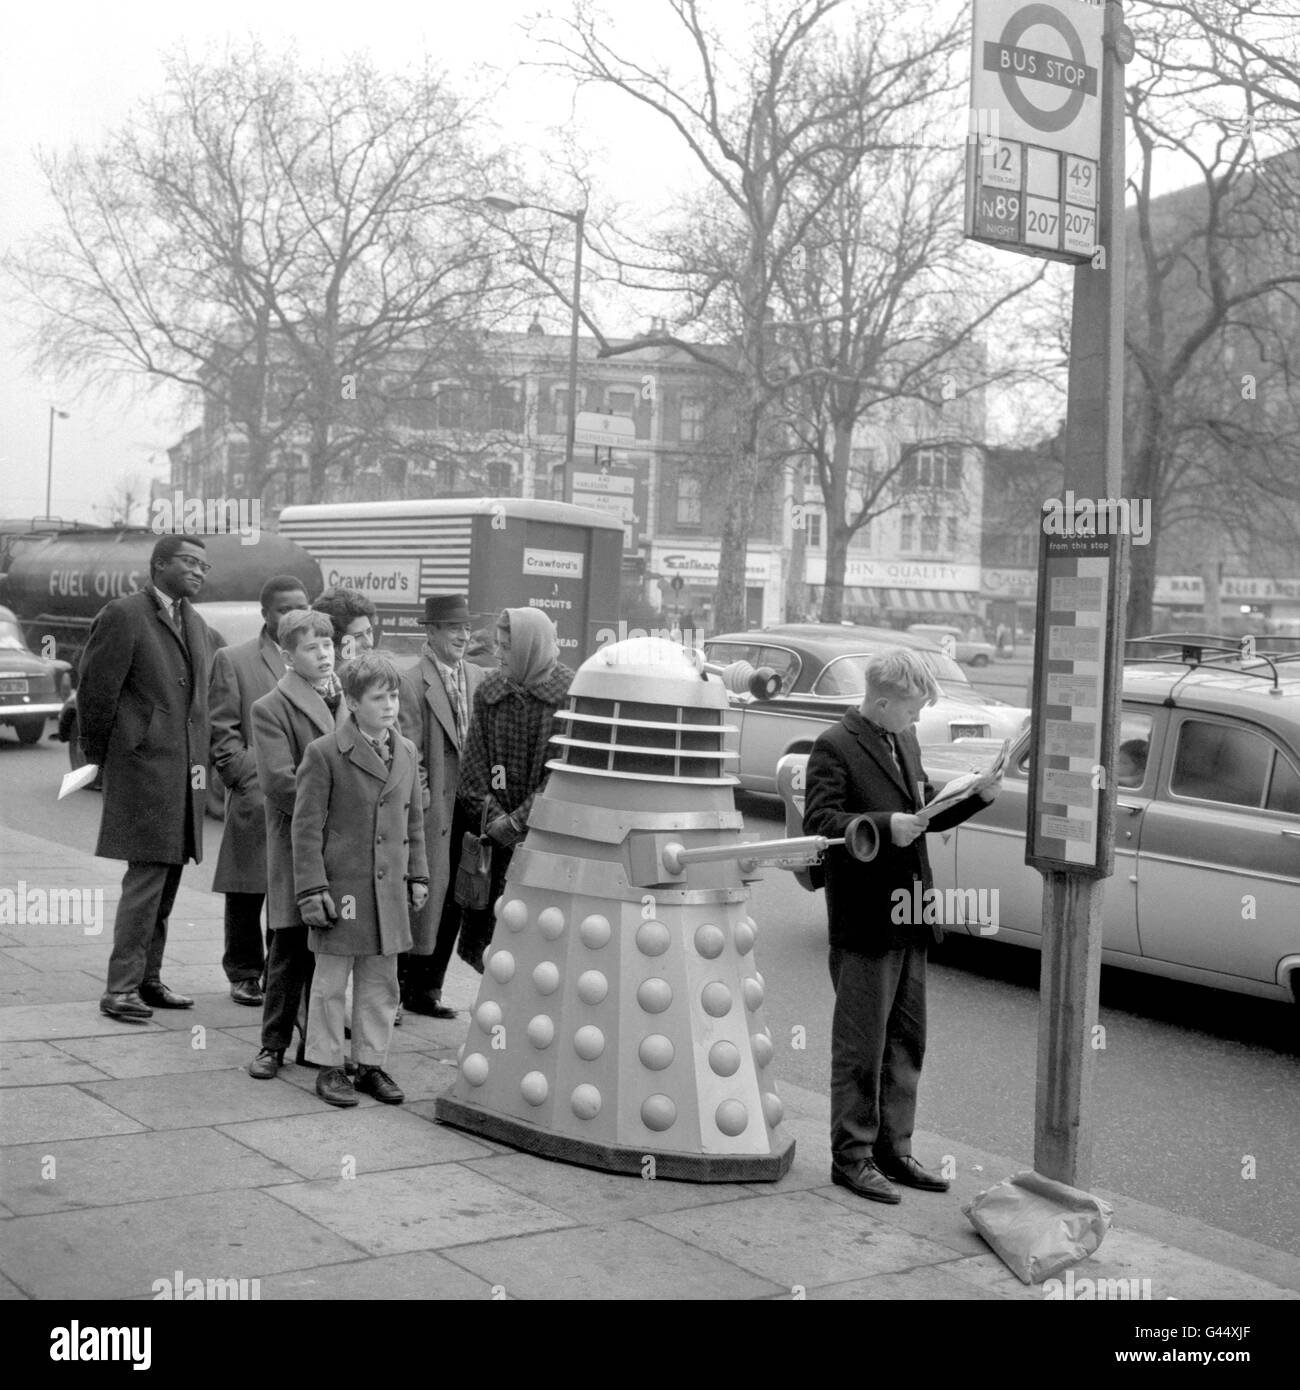 A young queuing passenger reads his paper, unaware of the Dalek, from the BBC television programme 'Dr Who', in the queue behind him. Stock Photo